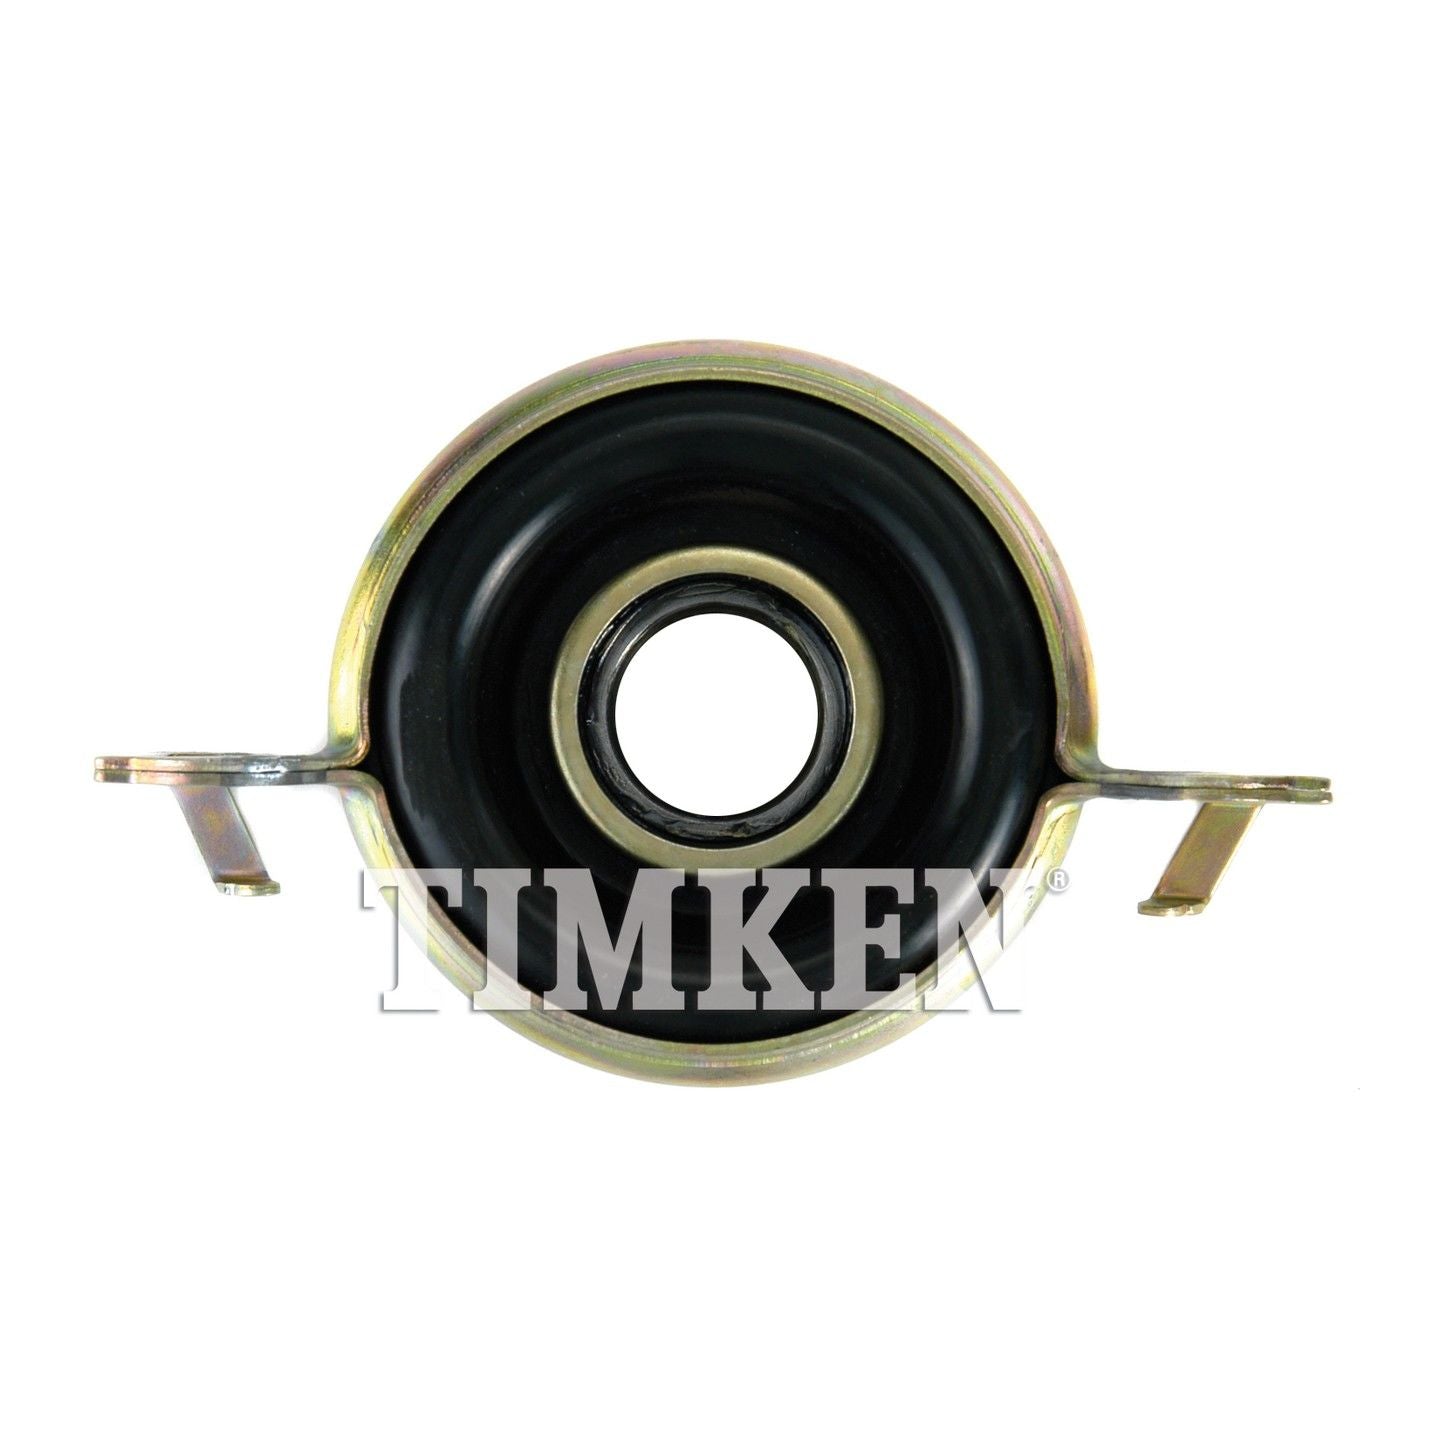 Back View of Drive Shaft Center Support Bearing TIMKEN HB28